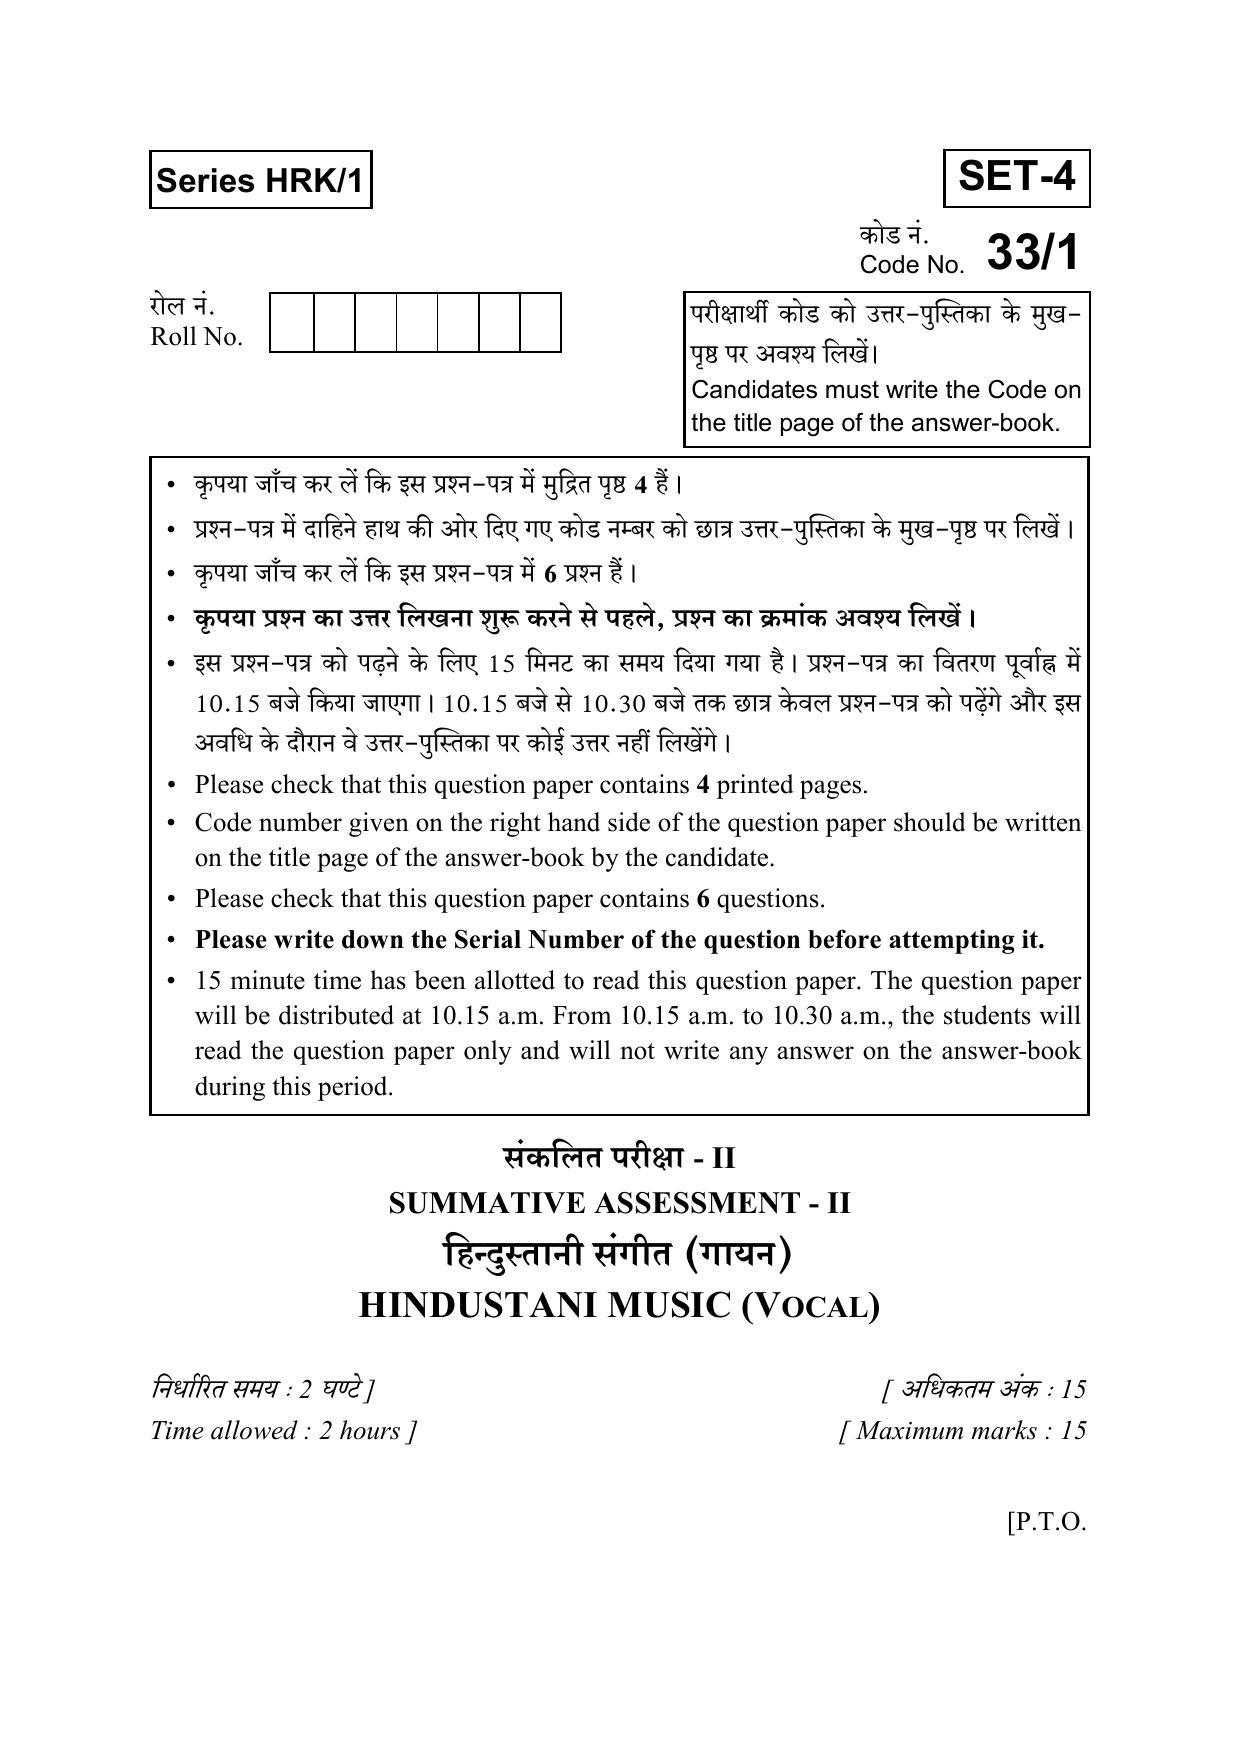 CBSE Class 10 33-1 MUSIC HINDUSTANI VOCAL 2017 Question Paper - Page 1